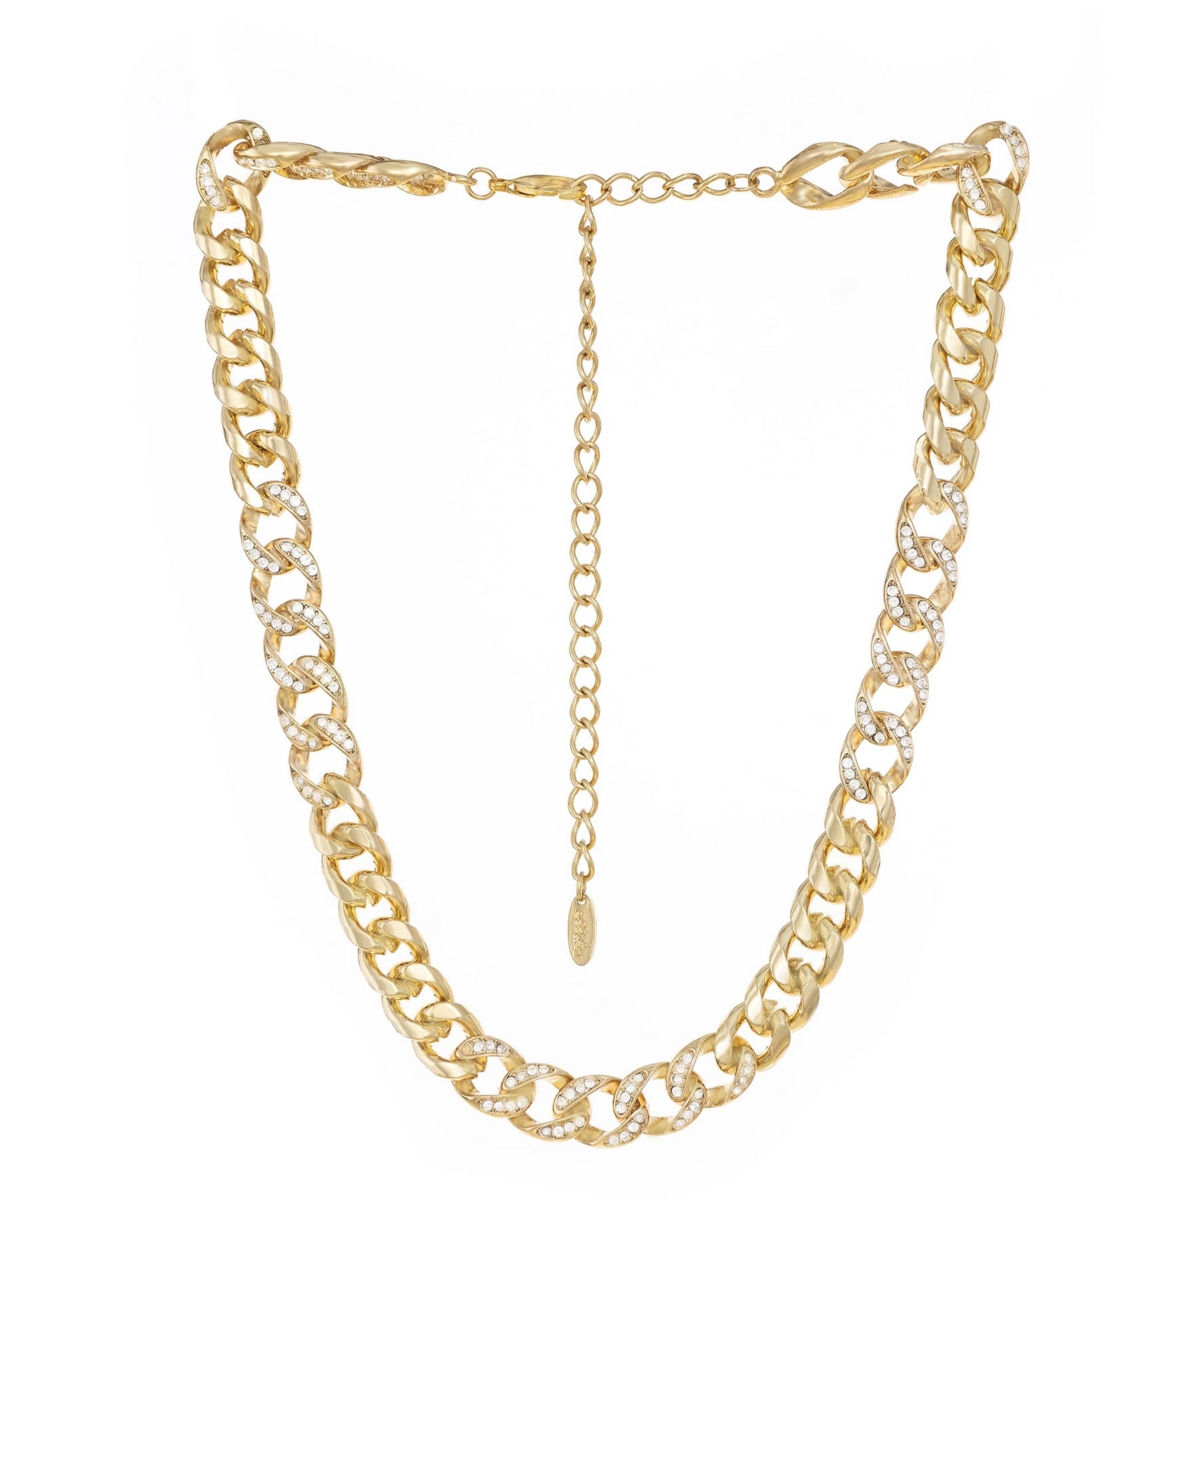 Bold and Gold Plated Crystal Link Chain Necklace - Gold Plated